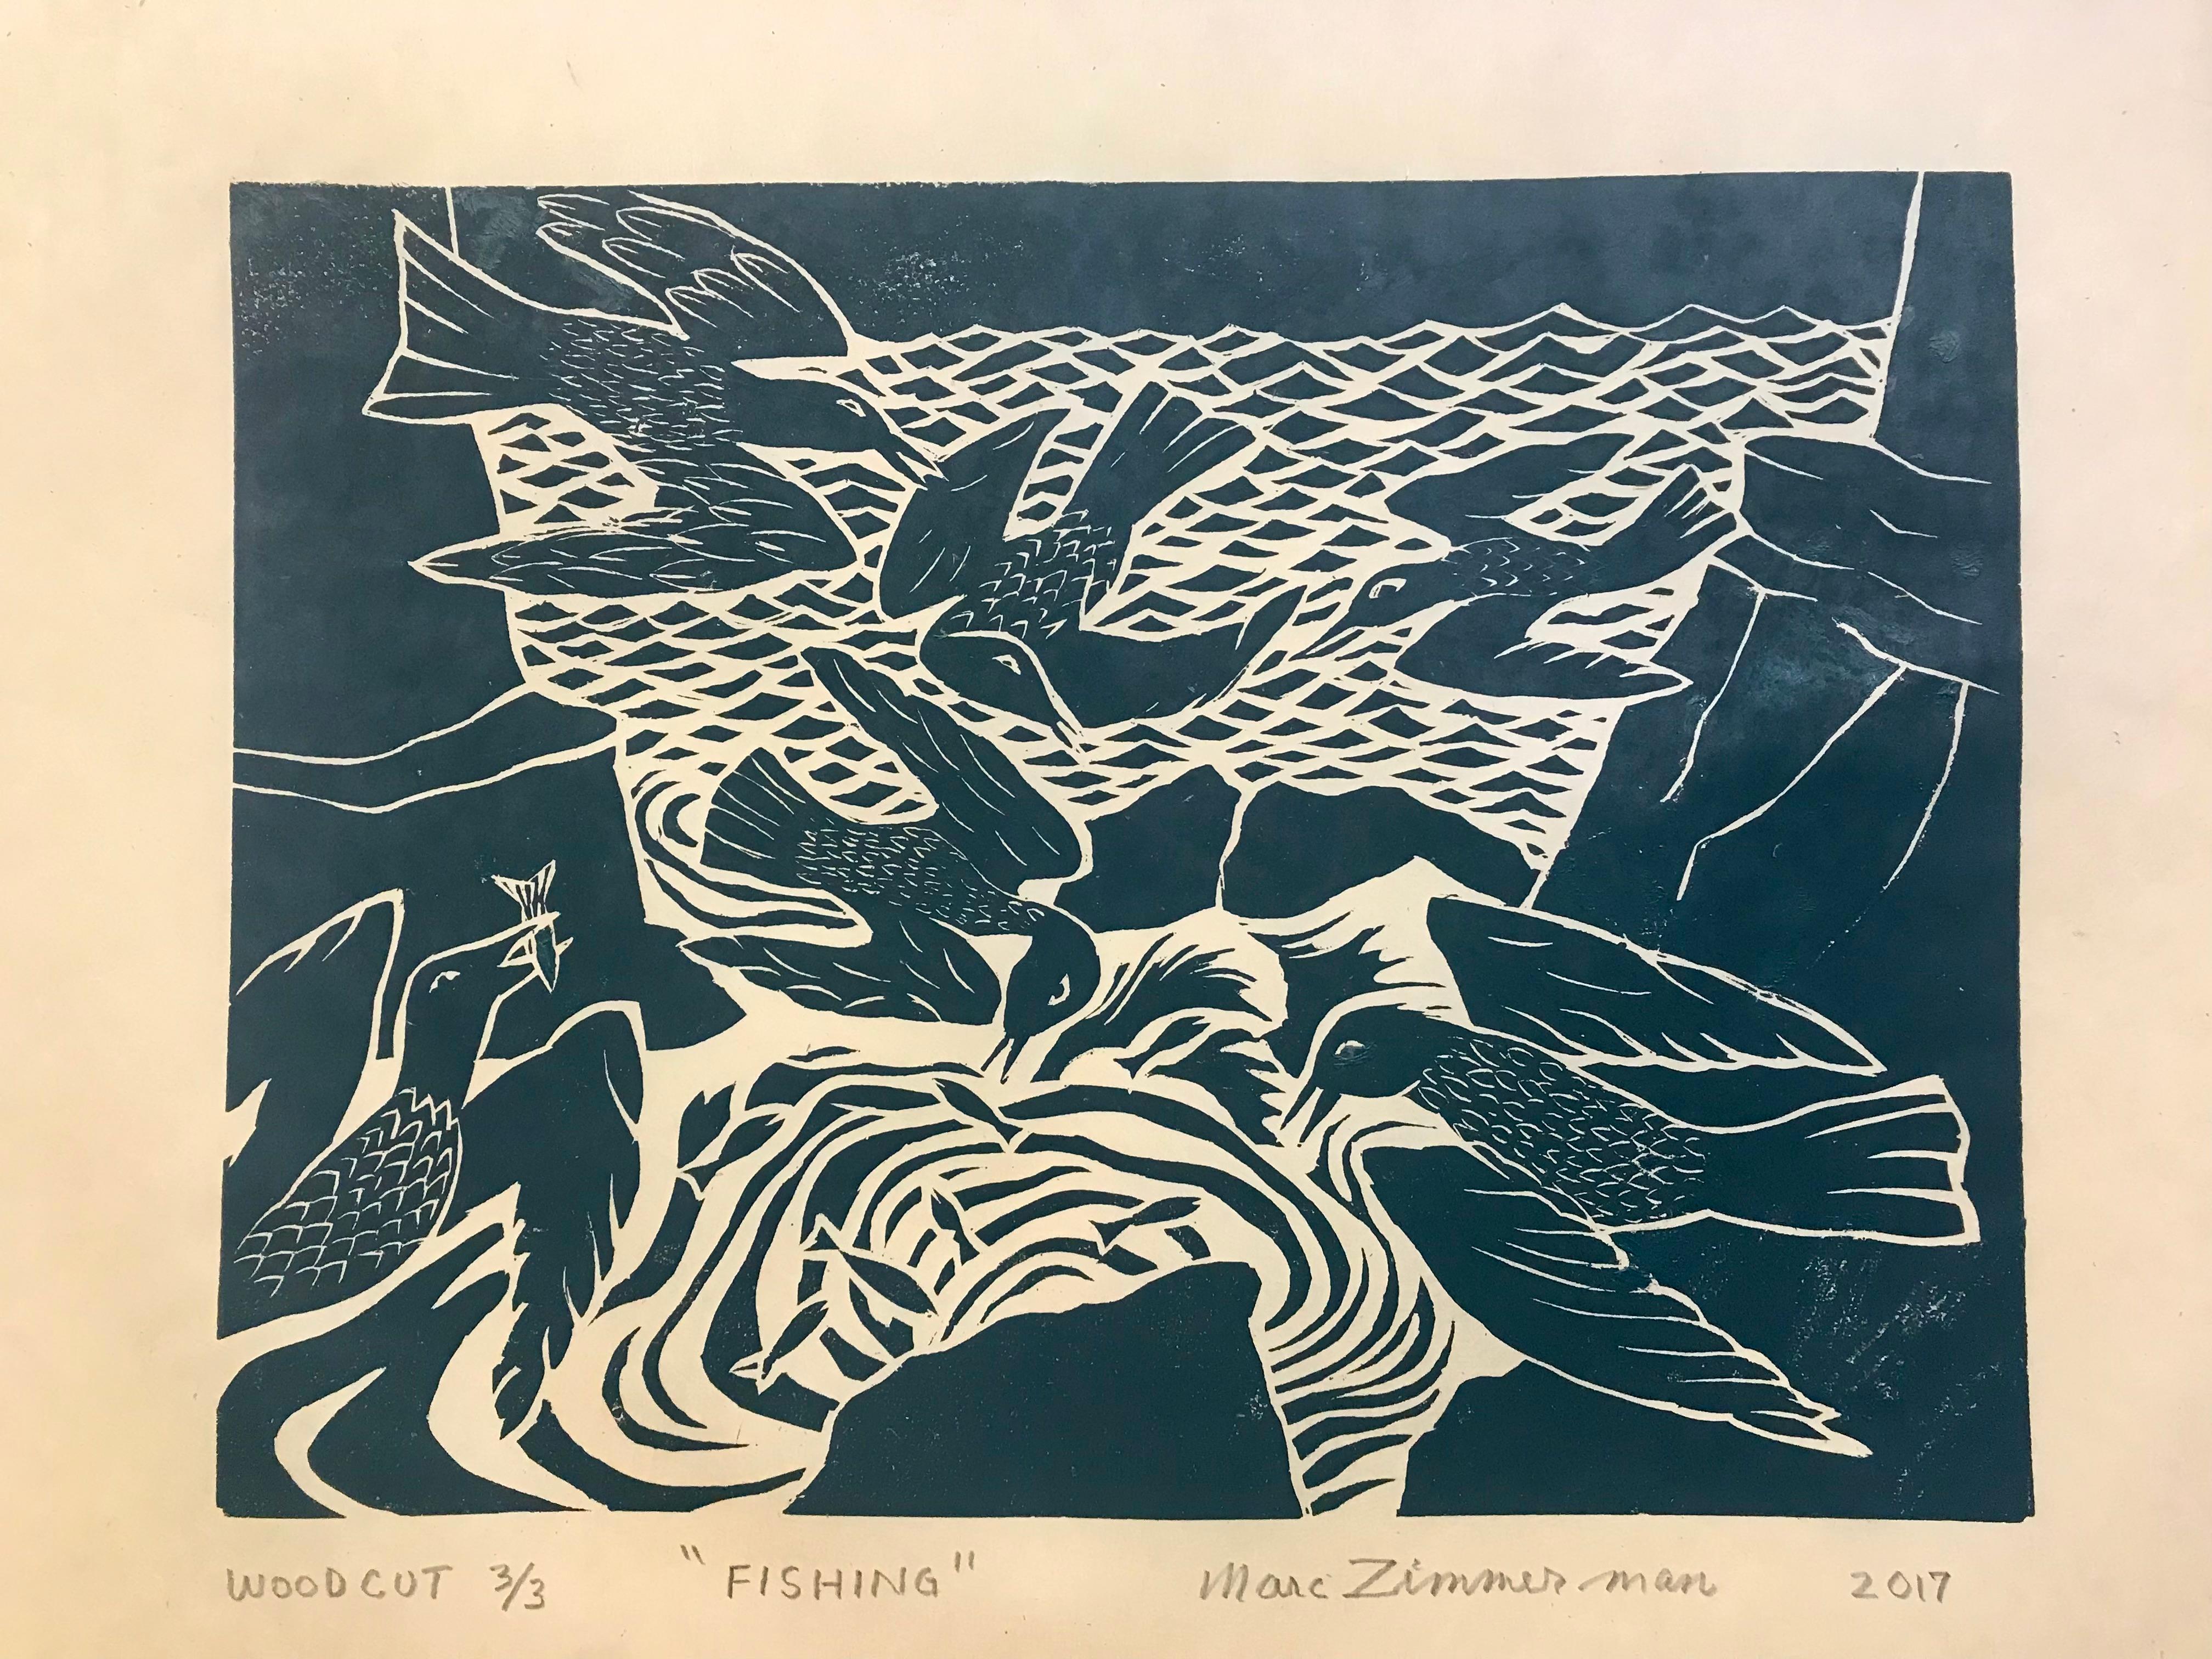 Black ink on buff Japanese rice paper. This image came from watching the sea birds on Kauai, Hawaii soaring along the bluffs on the north shore and diving for fish in the sea.

Fishing - Animal Print - Woodcut Print By Marc Zimmerman

This